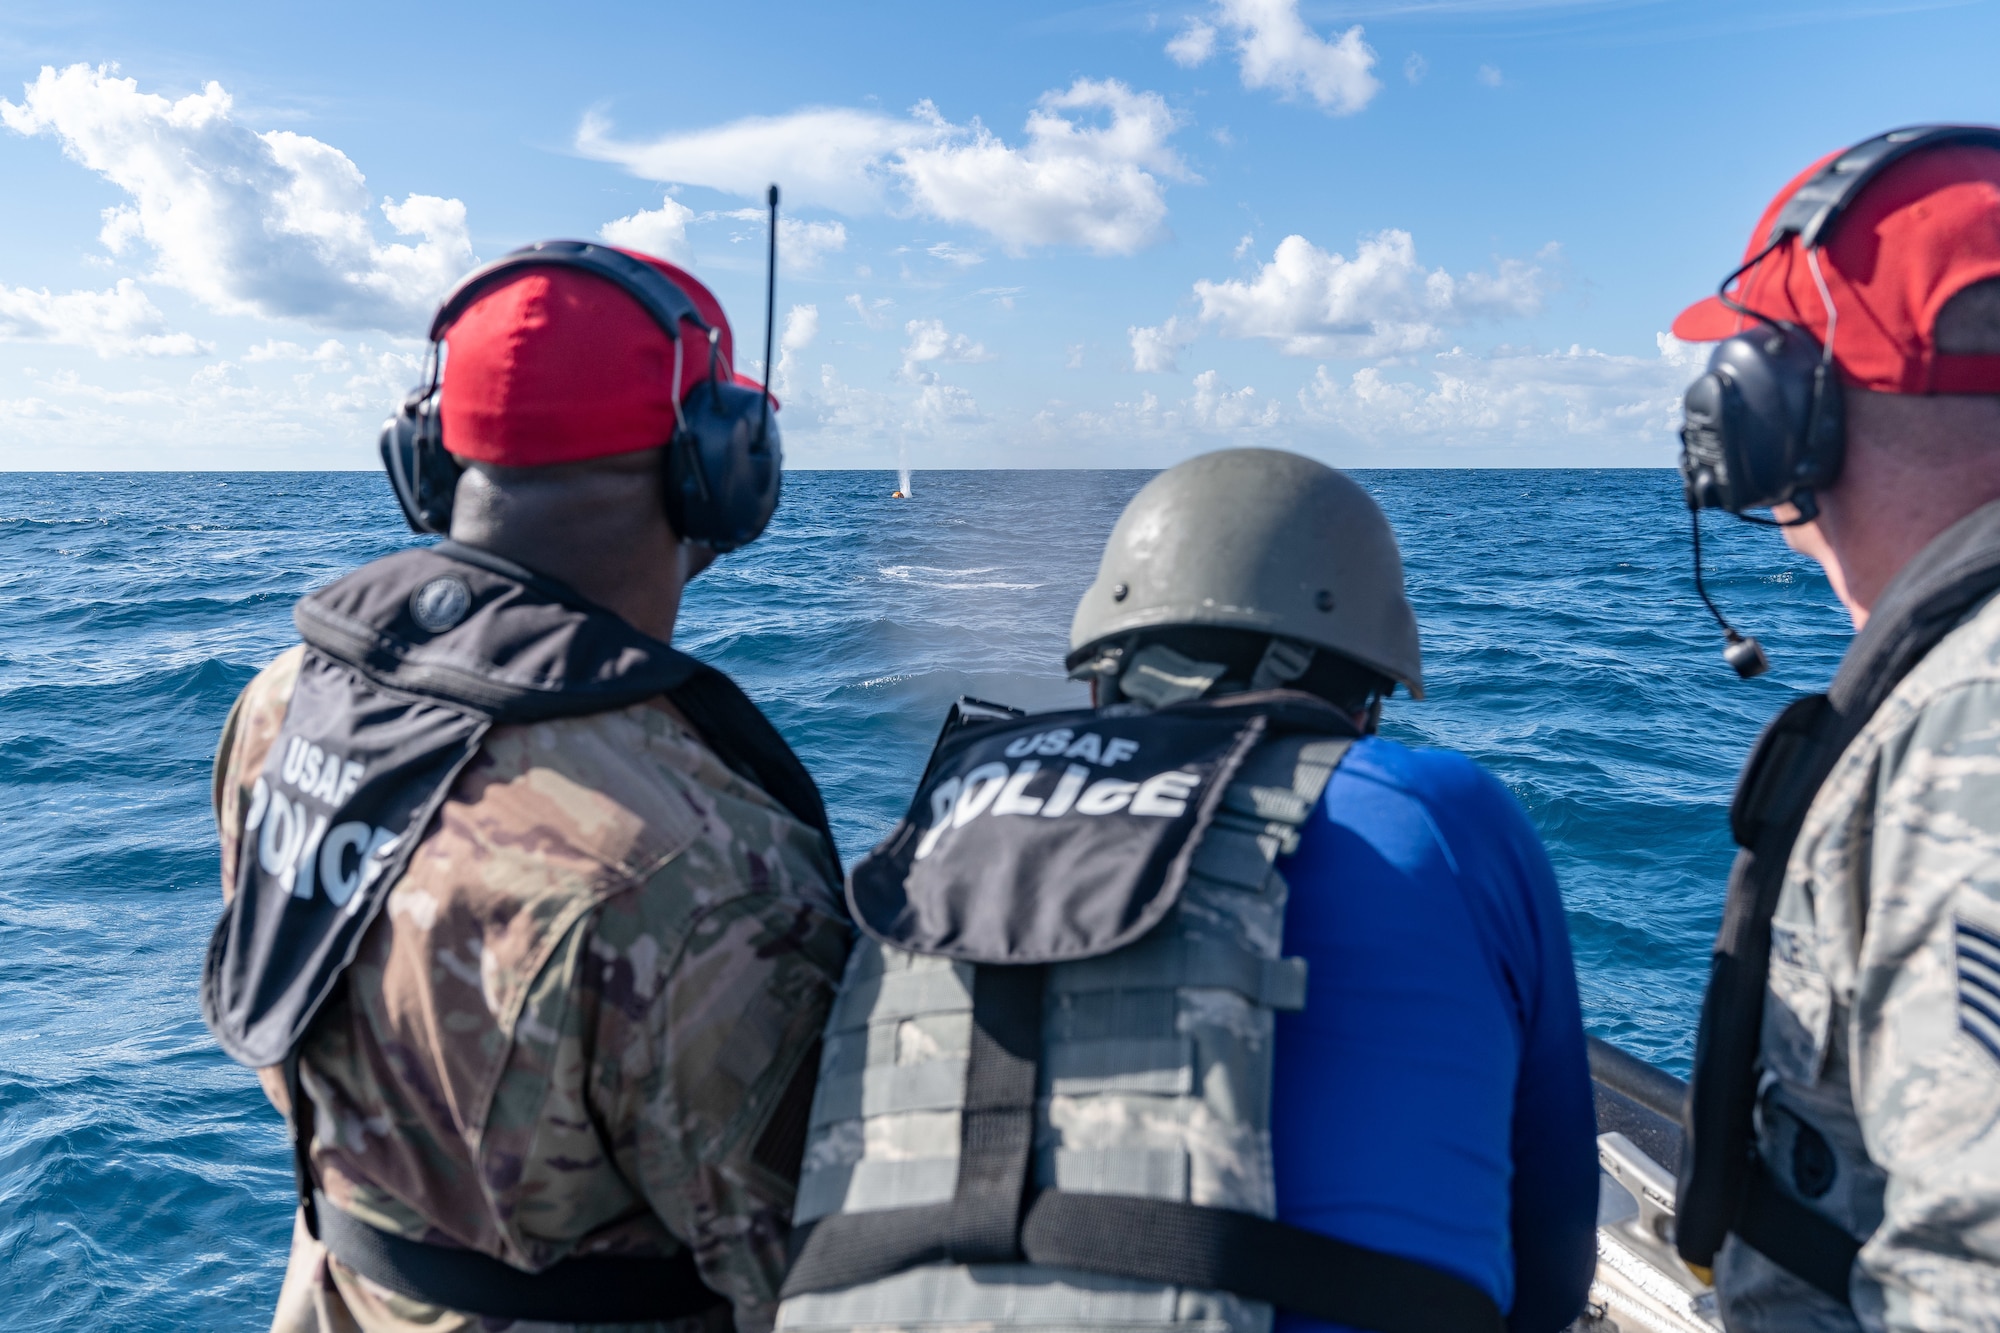 U.S. Air Force Tech. Sgt. Antonio J. Howard and Tech. Sgt. Randall D Perry, 6th Security Forces Squadron combat arms instructors, flank Senior Airman Bryan C. Scott, a 6th SFS marine patrolman, while he shoots an M240 machine gun at an orange target buoy 12 miles off the coast of St. Petersburg, Fla., July 2, 2019.